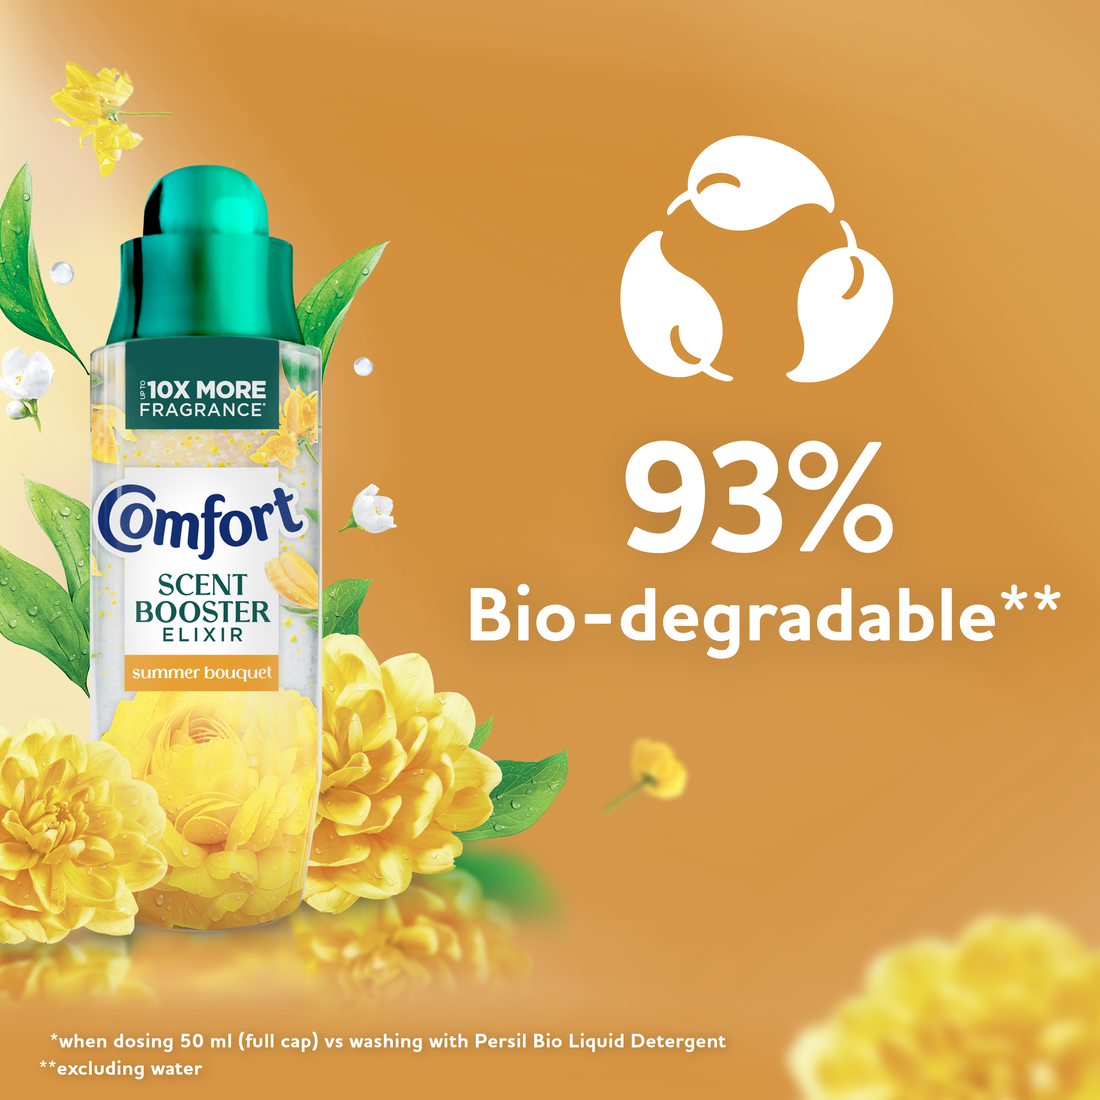 93% Bio-degradable

*when dosing 50ml (full cap) vs washing with Persil Bio Liquid Detergent
**excluding water